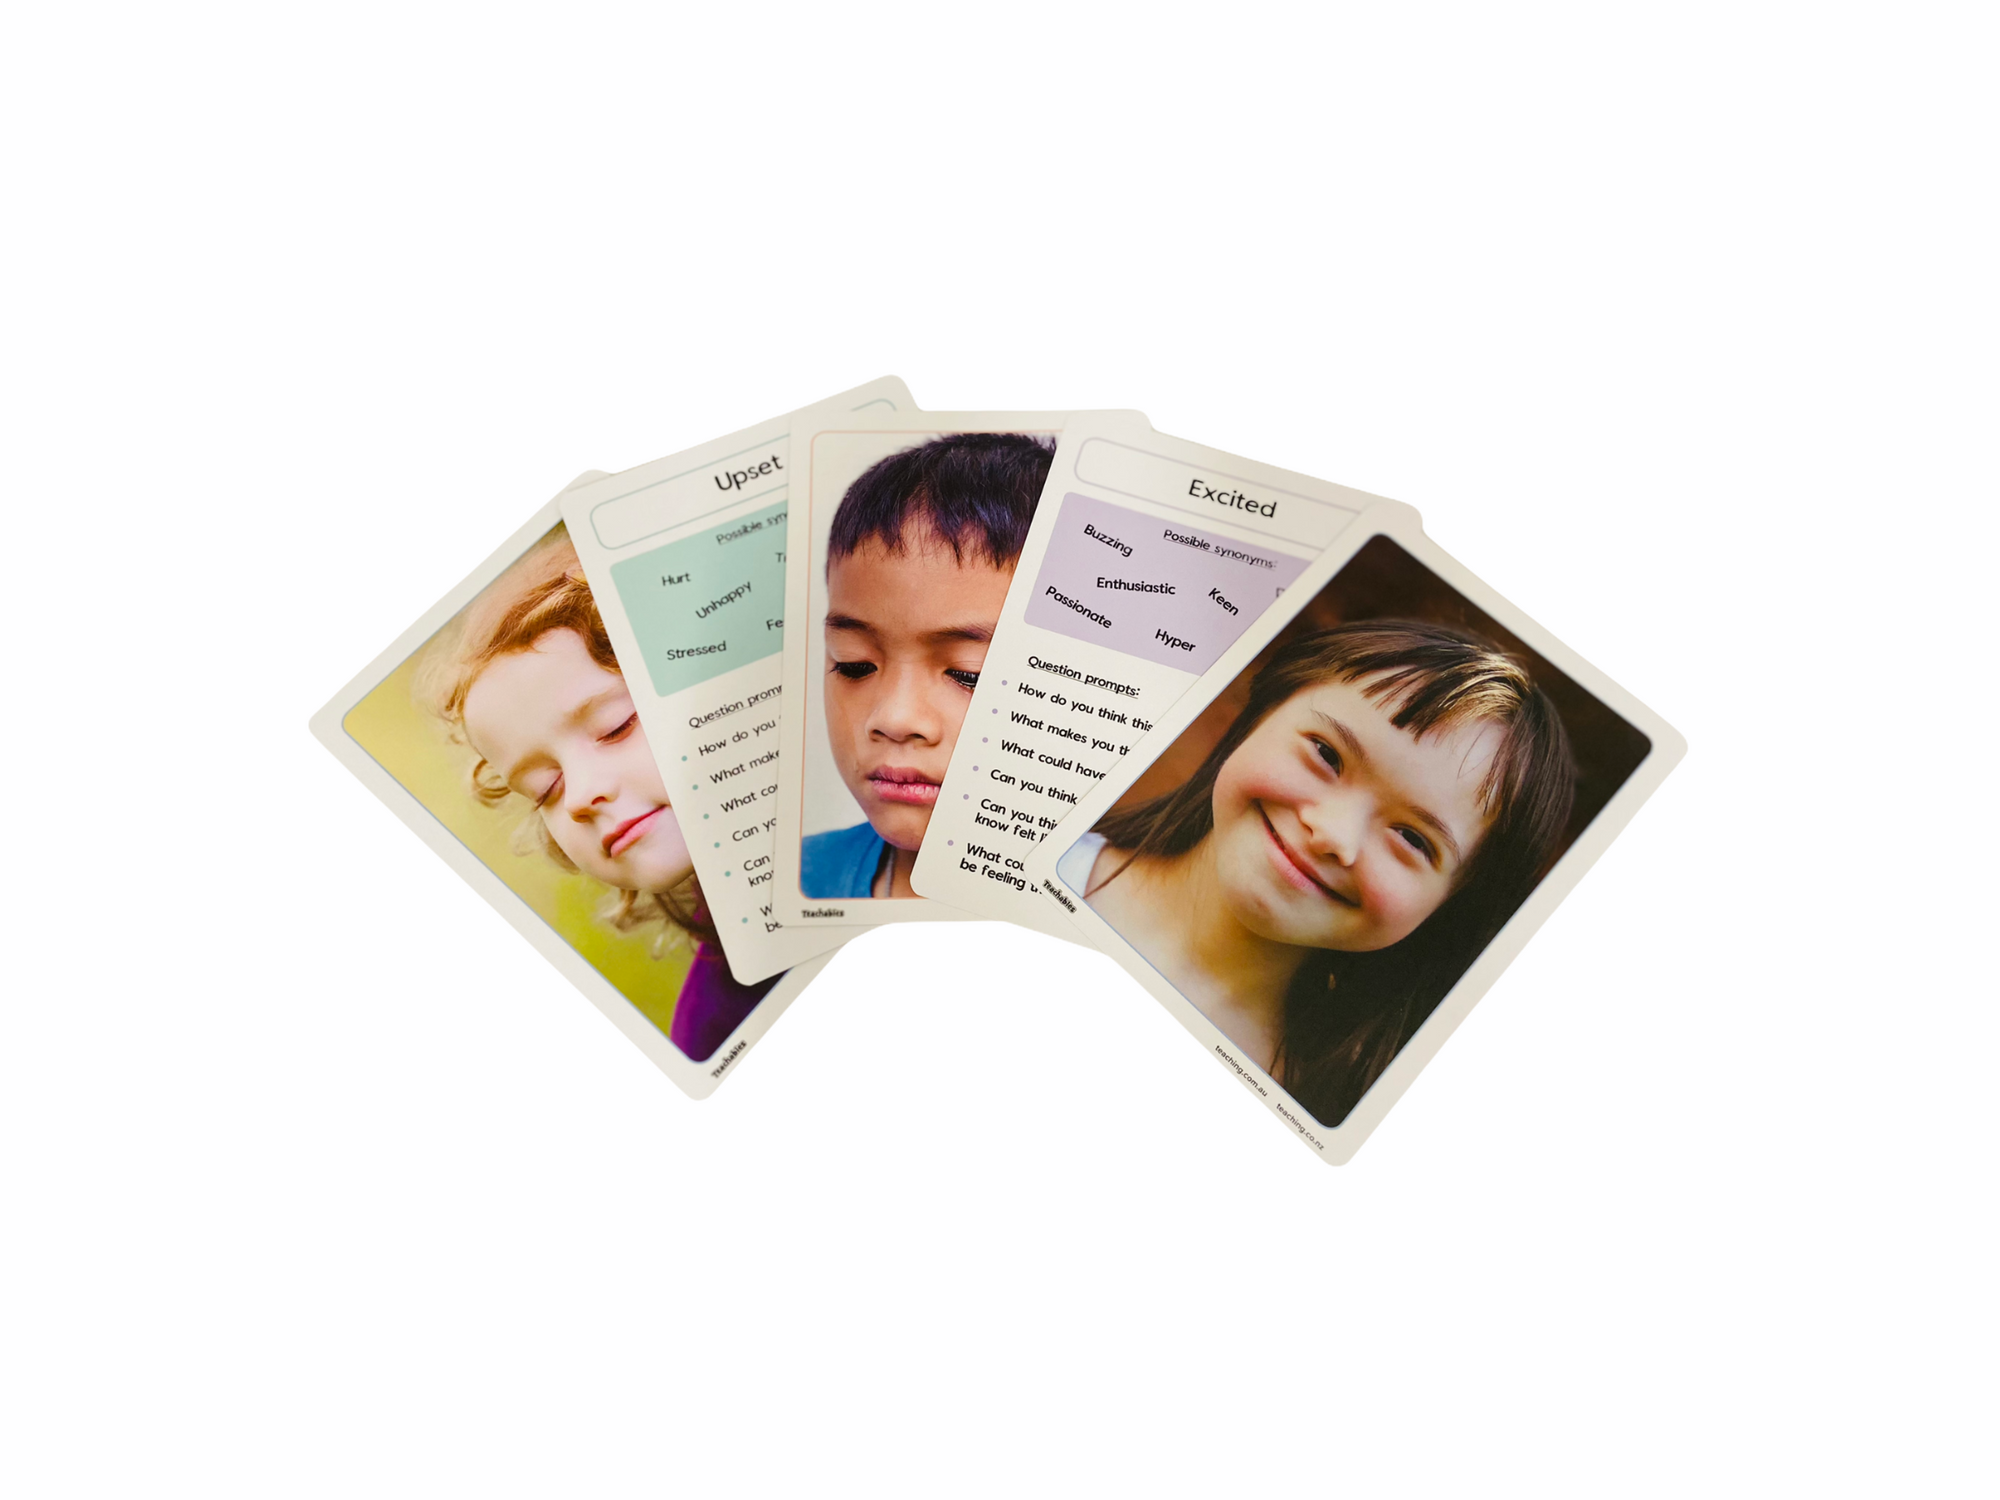 5 Teachables A4 Emotions Posters shown with children's faces  on 3 cards and descriptions on 2 cards